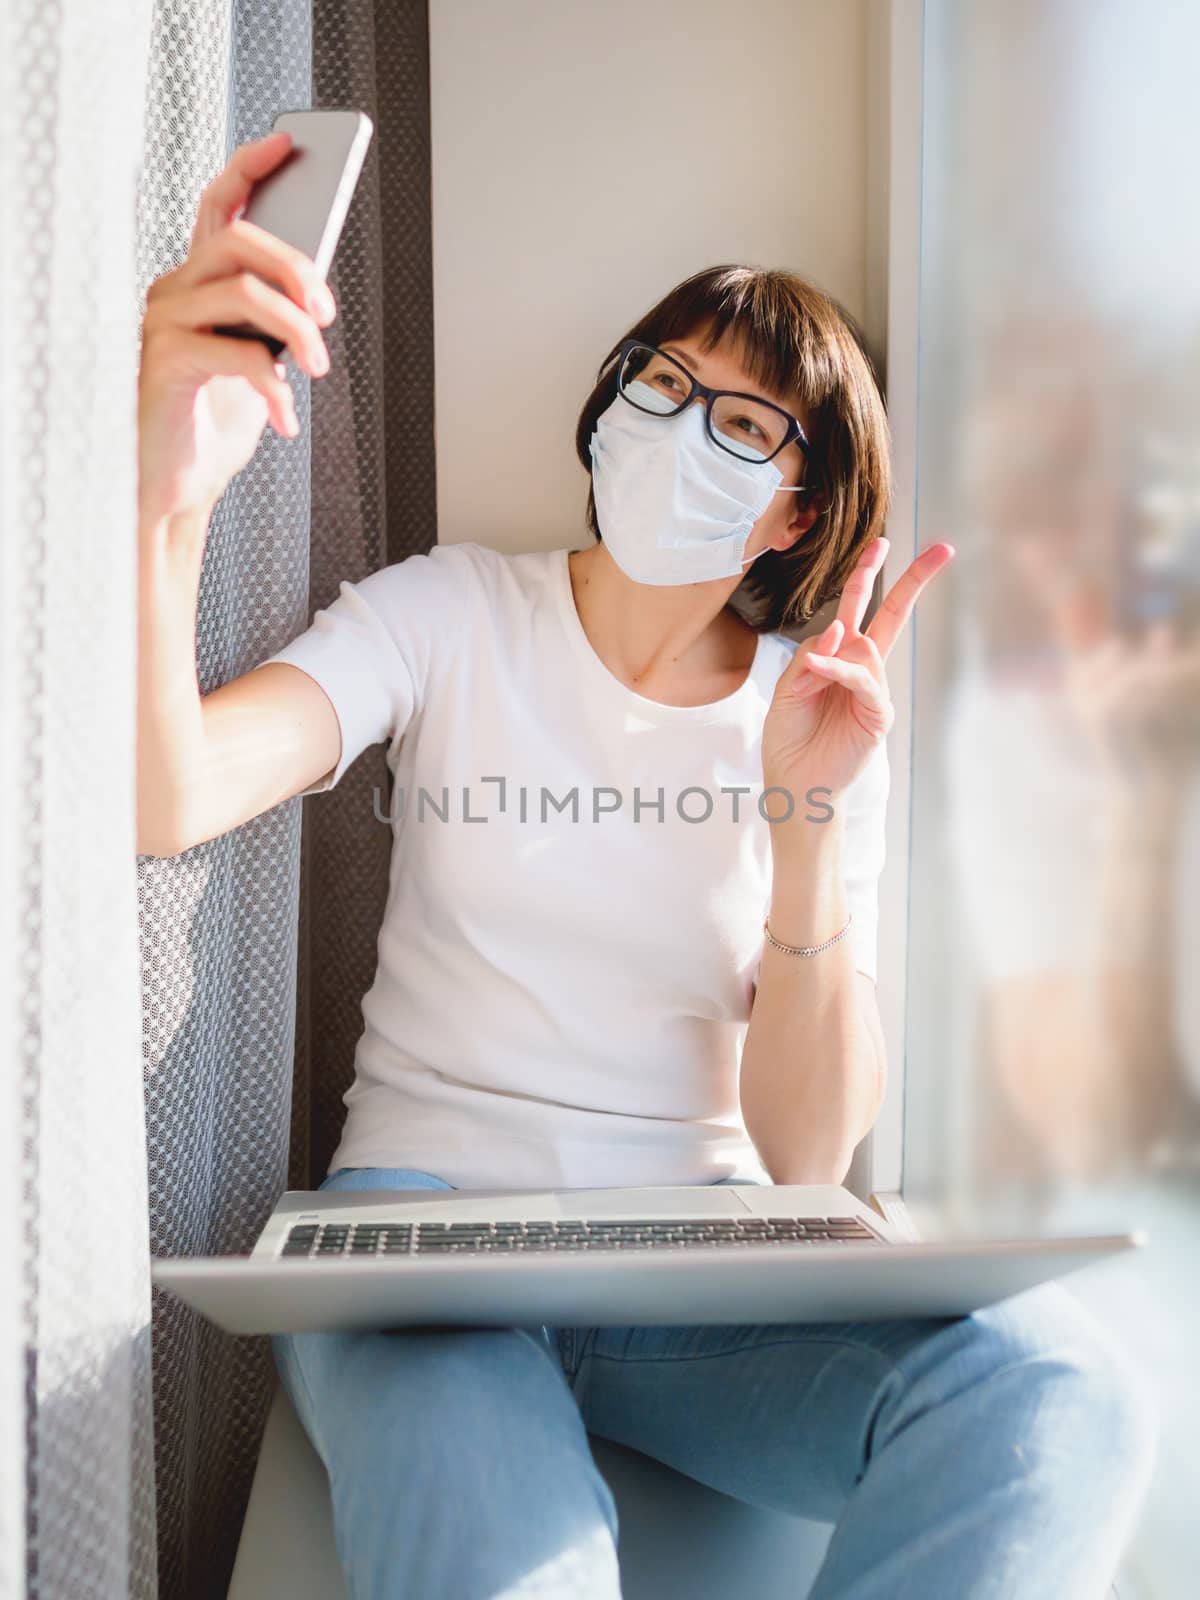 Pretty woman in medical mask works remotely from home. She is making selfie with Victory gesture on window sill with laptop on knees. Lockdown quarantine because of coronavirus COVID19. Self isolation at home.